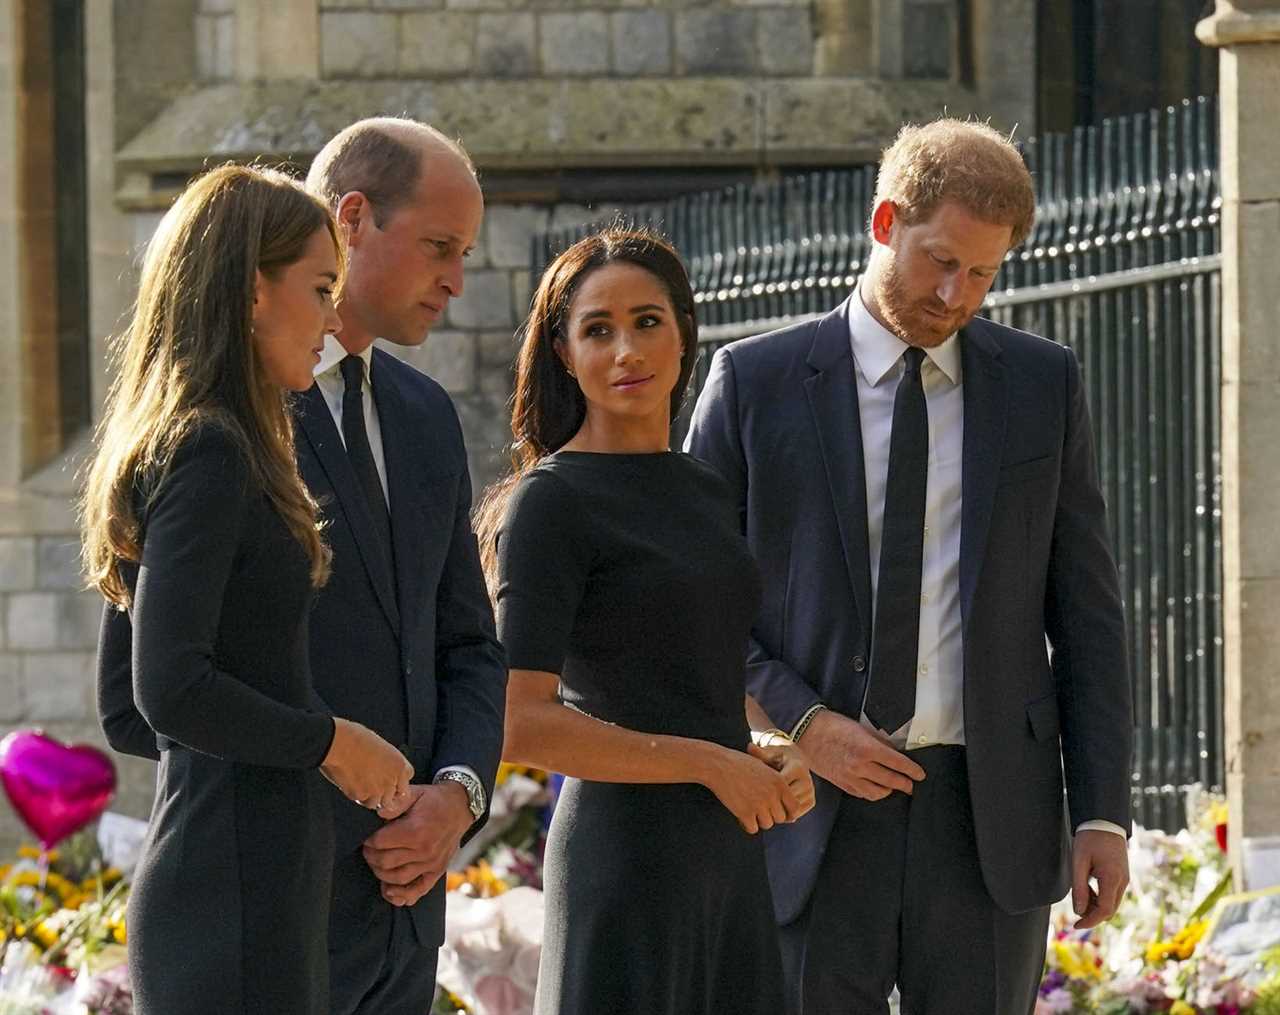 Princess Kate ‘found walkabout with Meghan Markle and Prince Harry difficult’ due to ‘ill-feeling’ between couples